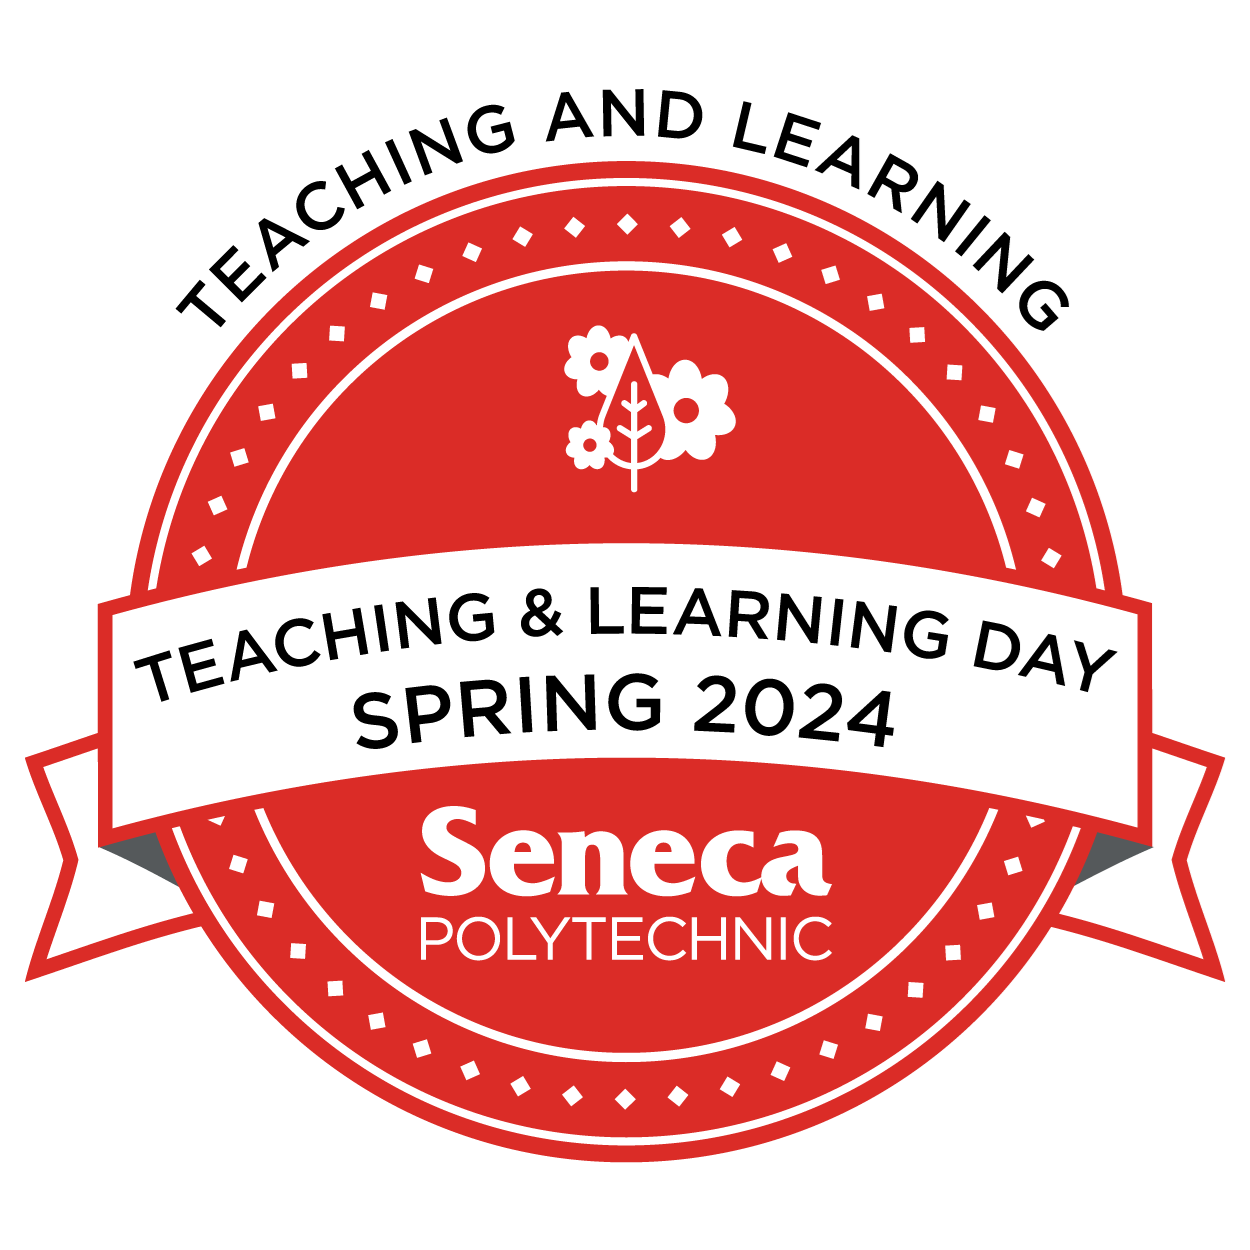 the micro-credential for Teaching & Learning Day Spring 2024